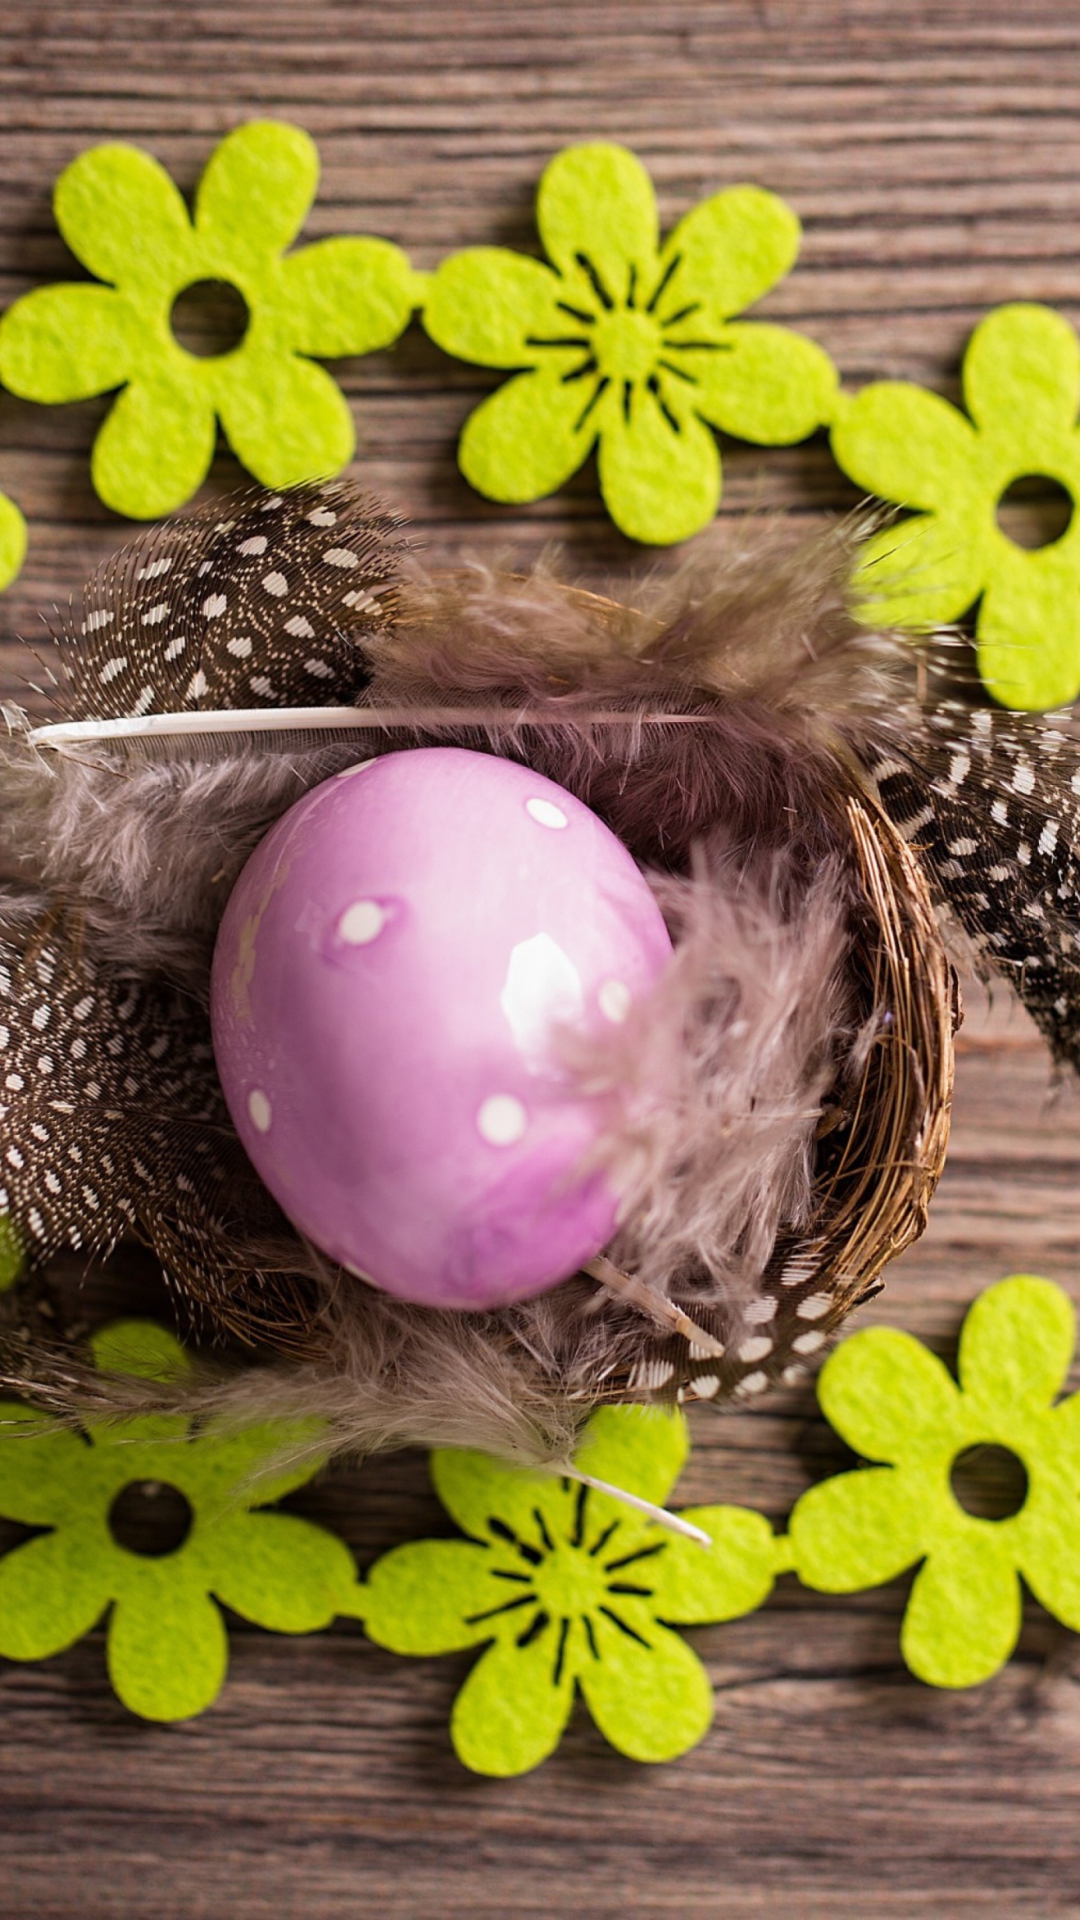 Purple Egg, Feathers And Green Flowers wallpaper 1080x1920